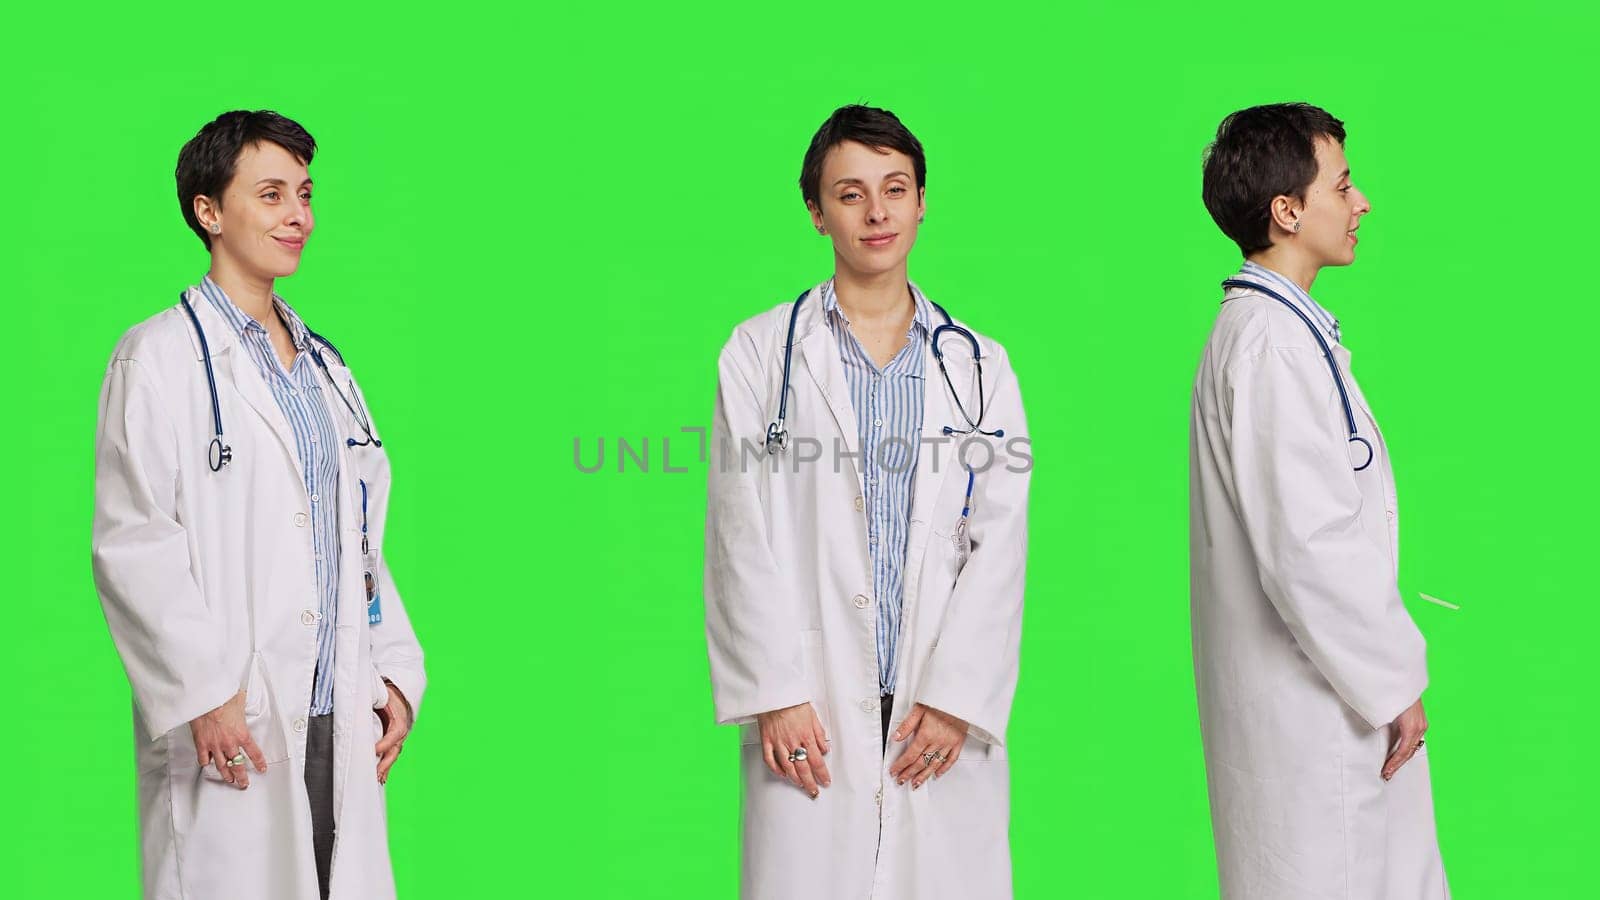 Portrait of physician wearing a white coat and a stethoscope for exams by DCStudio